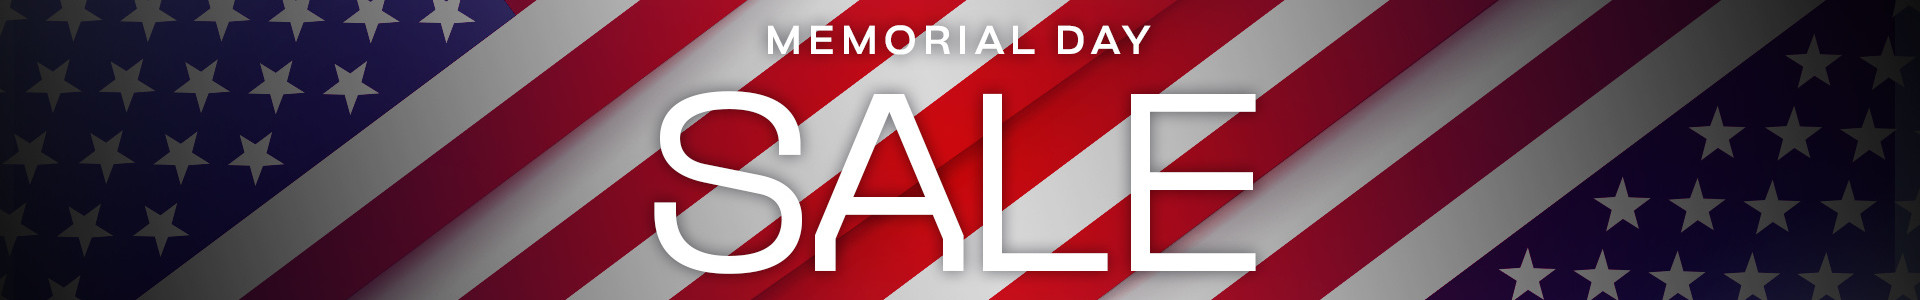 Dainese Memorial Day Sale